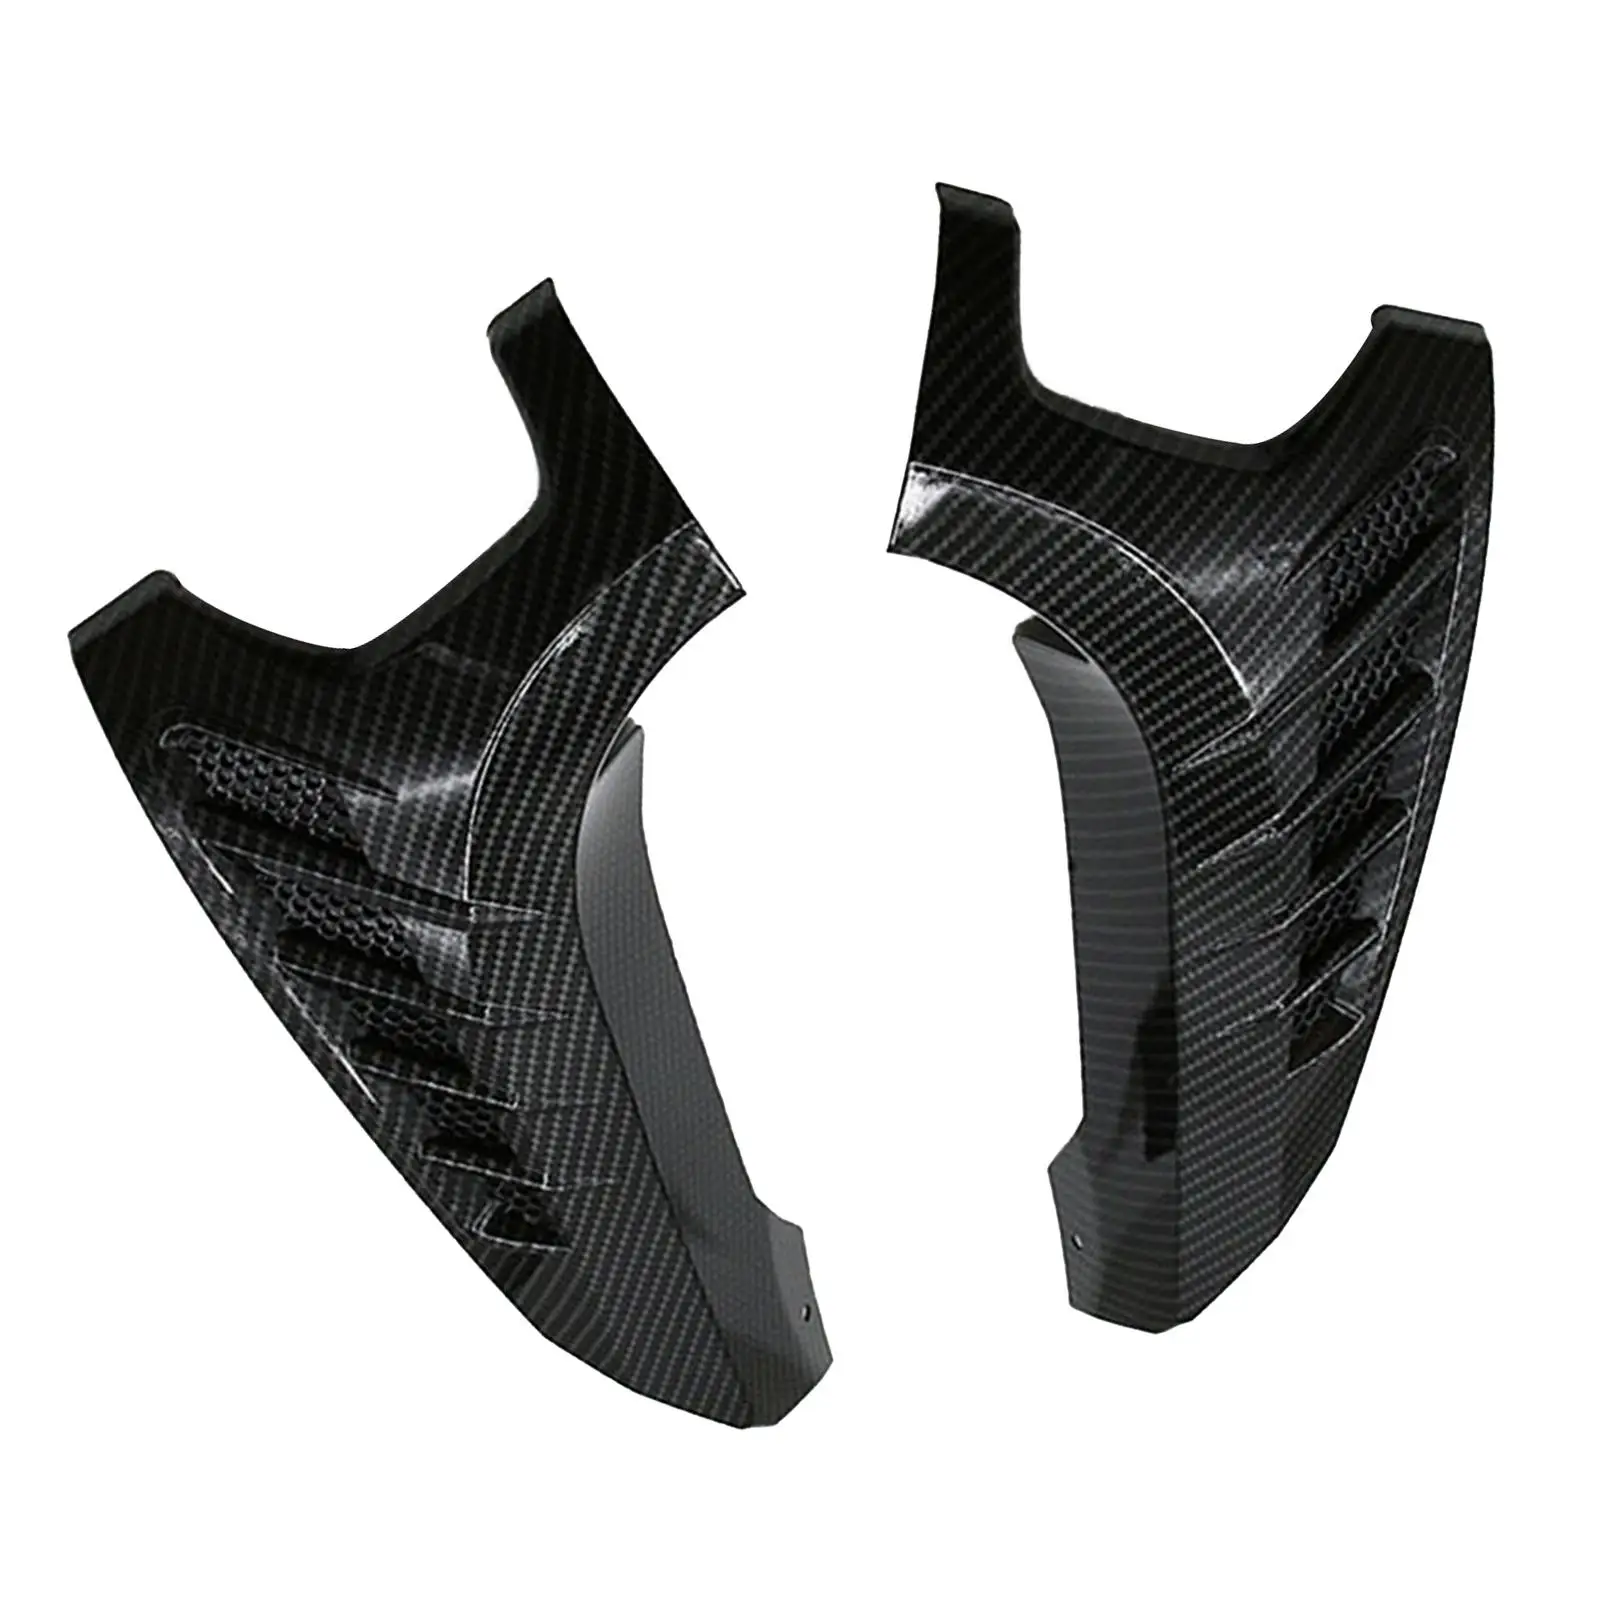 2 Pcs Carbon Fiber Turn Signal Light Cover Front Lamp Guards for Yamaha Nmax155 N-Max 155 2020 2021 Motorcycle Parts